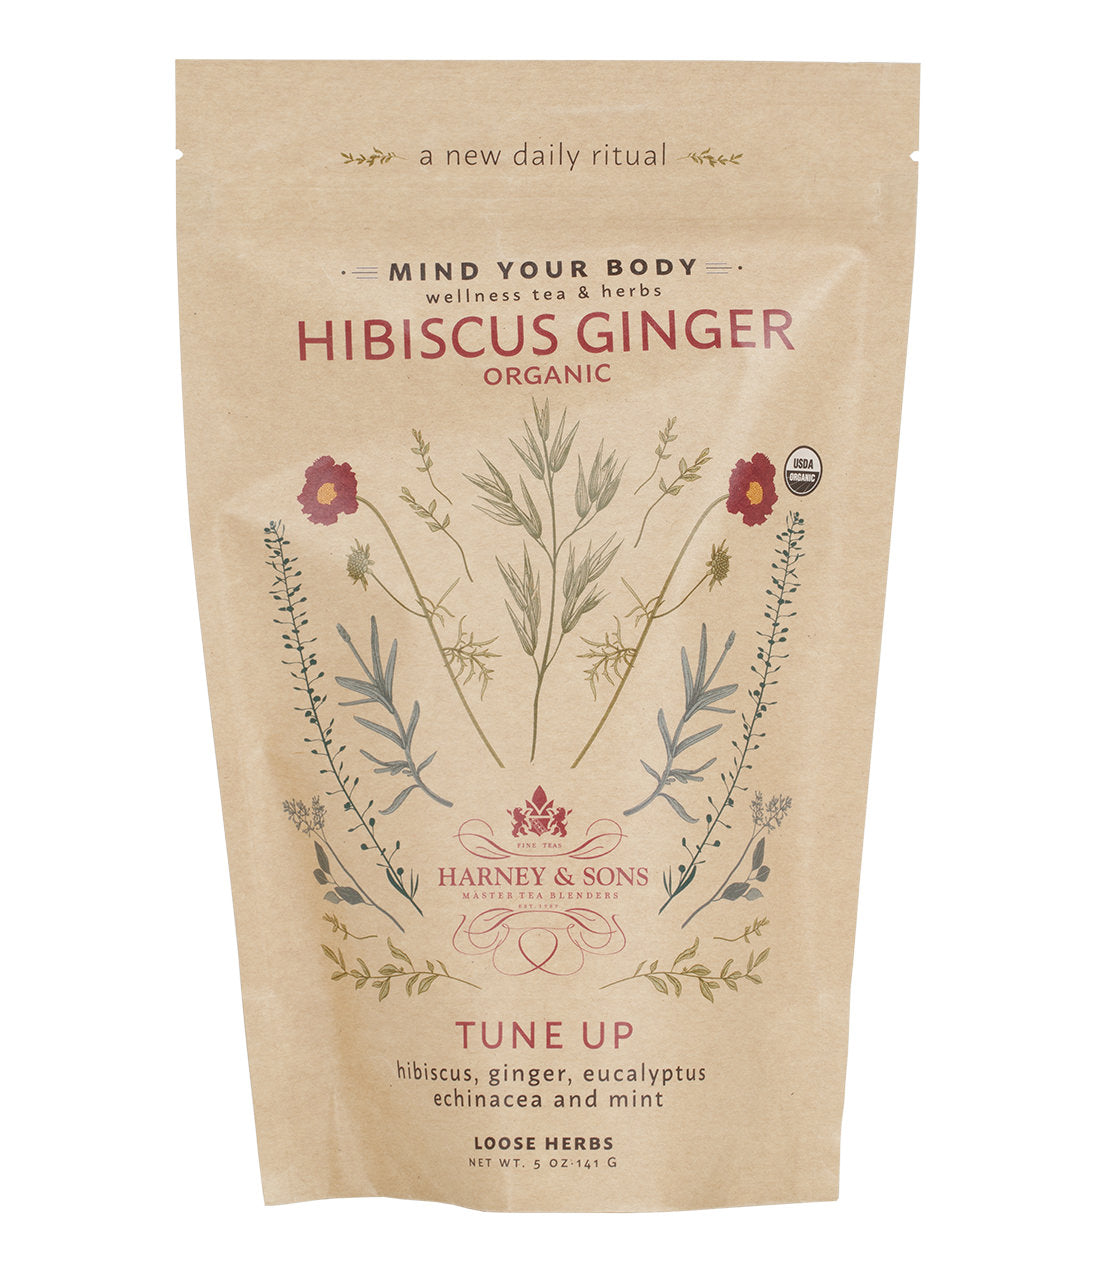 Organic Hibiscus Ginger - Tune Up - Loose 5 oz. Bag - Harney & Sons Fine Teas